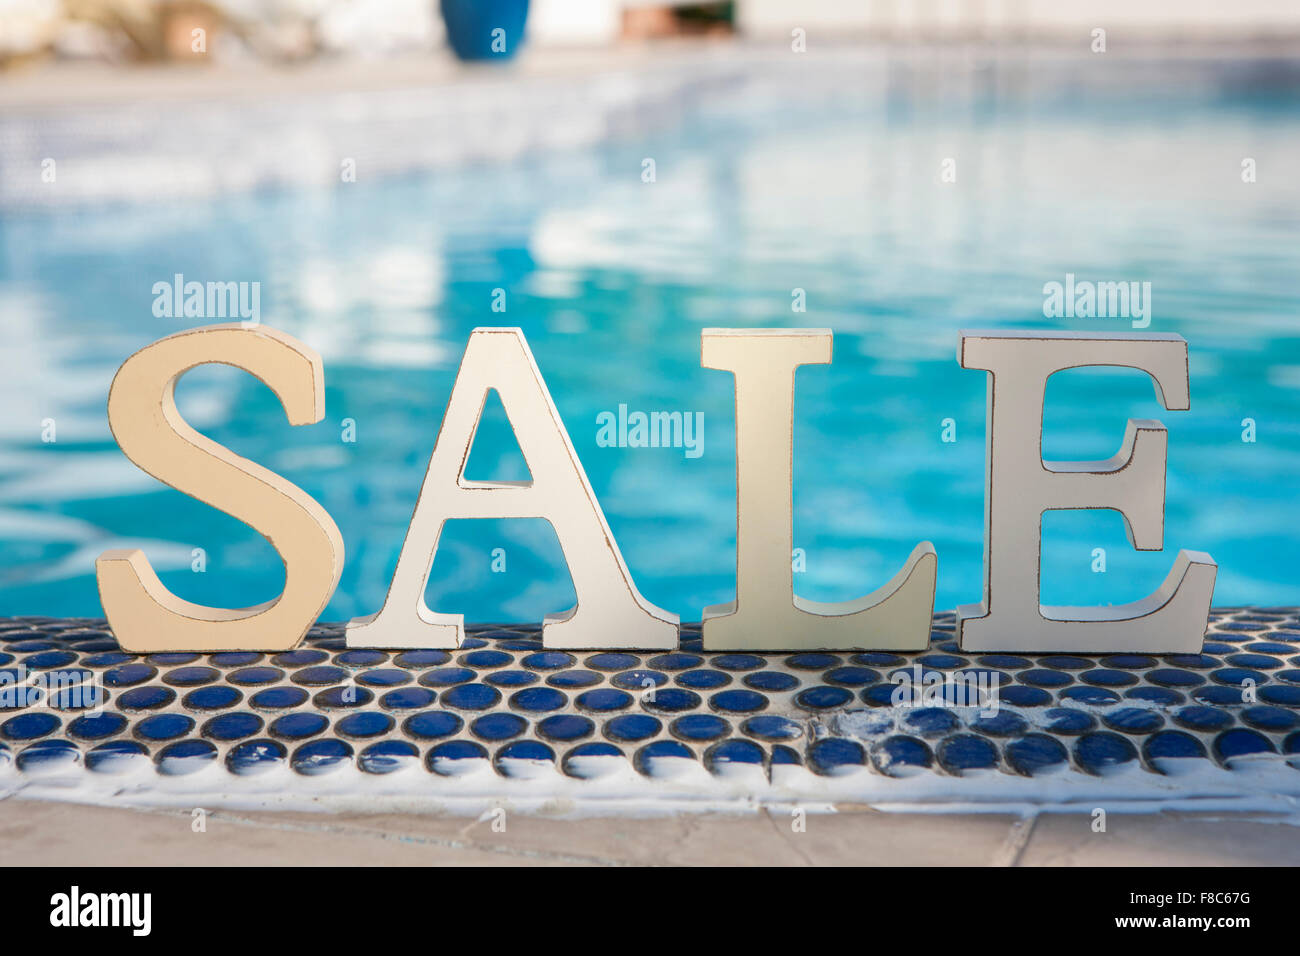 English characters of SALE standing on blue tiles at the edge of the swimming pool Stock Photo